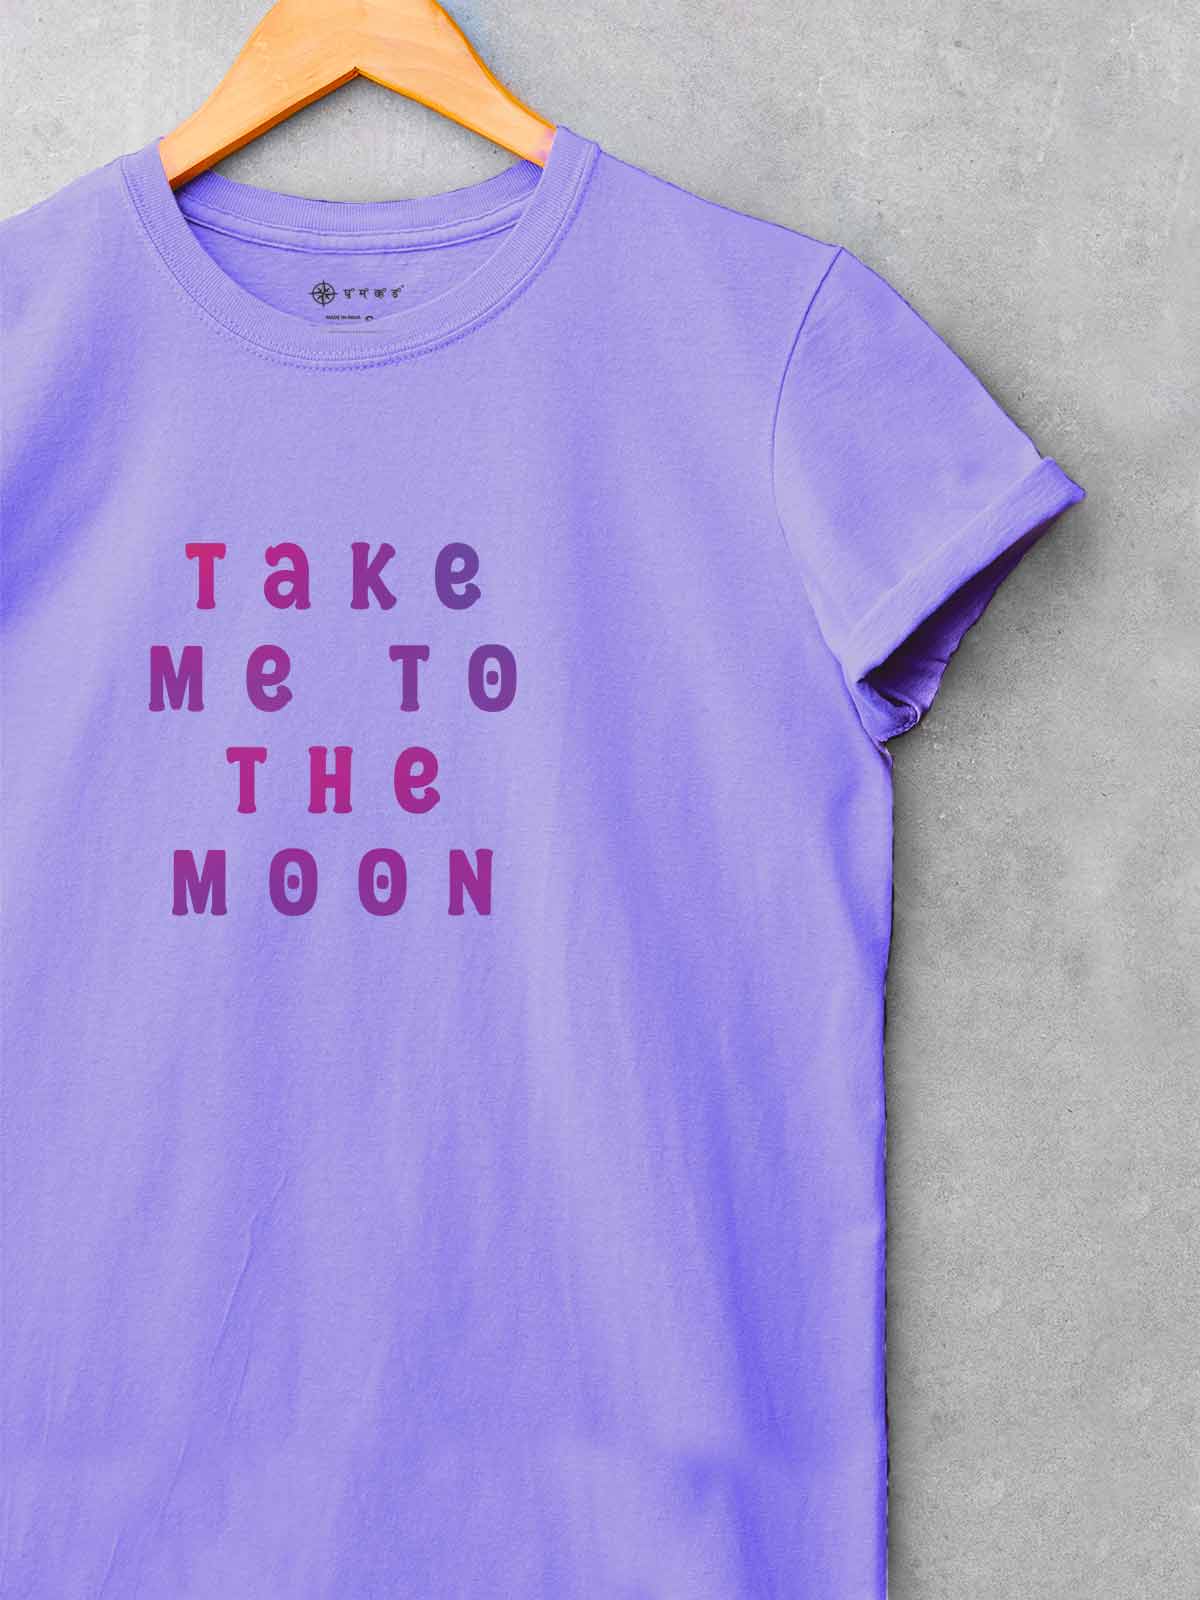 The-moon-party-backprint-t-shirt-for-men by Ghumakkad